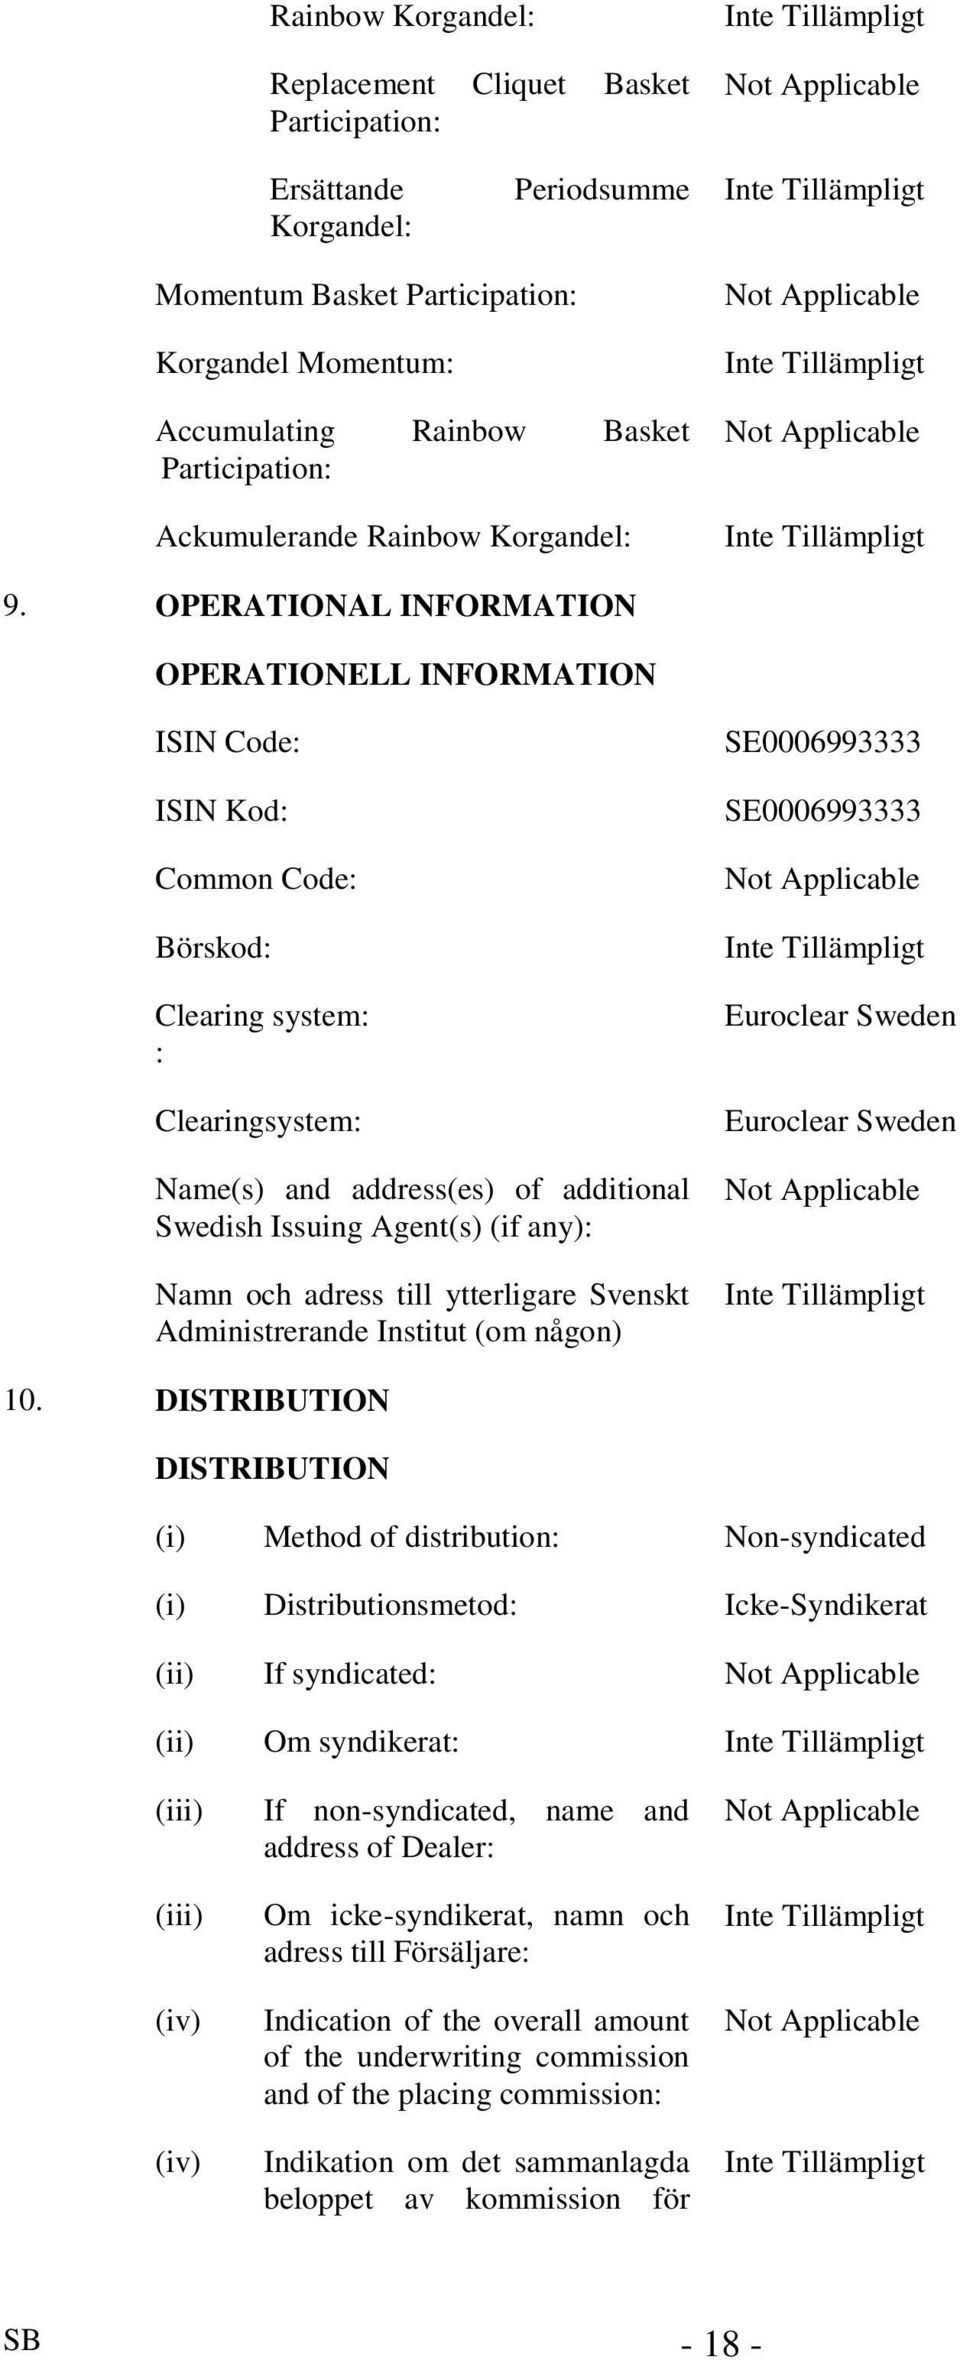 OPERATIONAL INFORMATION OPERATIONELL INFORMATION ISIN Code: ISIN Kod: Common Code: Börskod: Clearing system: : Clearingsystem: Name(s) and address(es) of additional Swedish Issuing Agent(s) (if any):